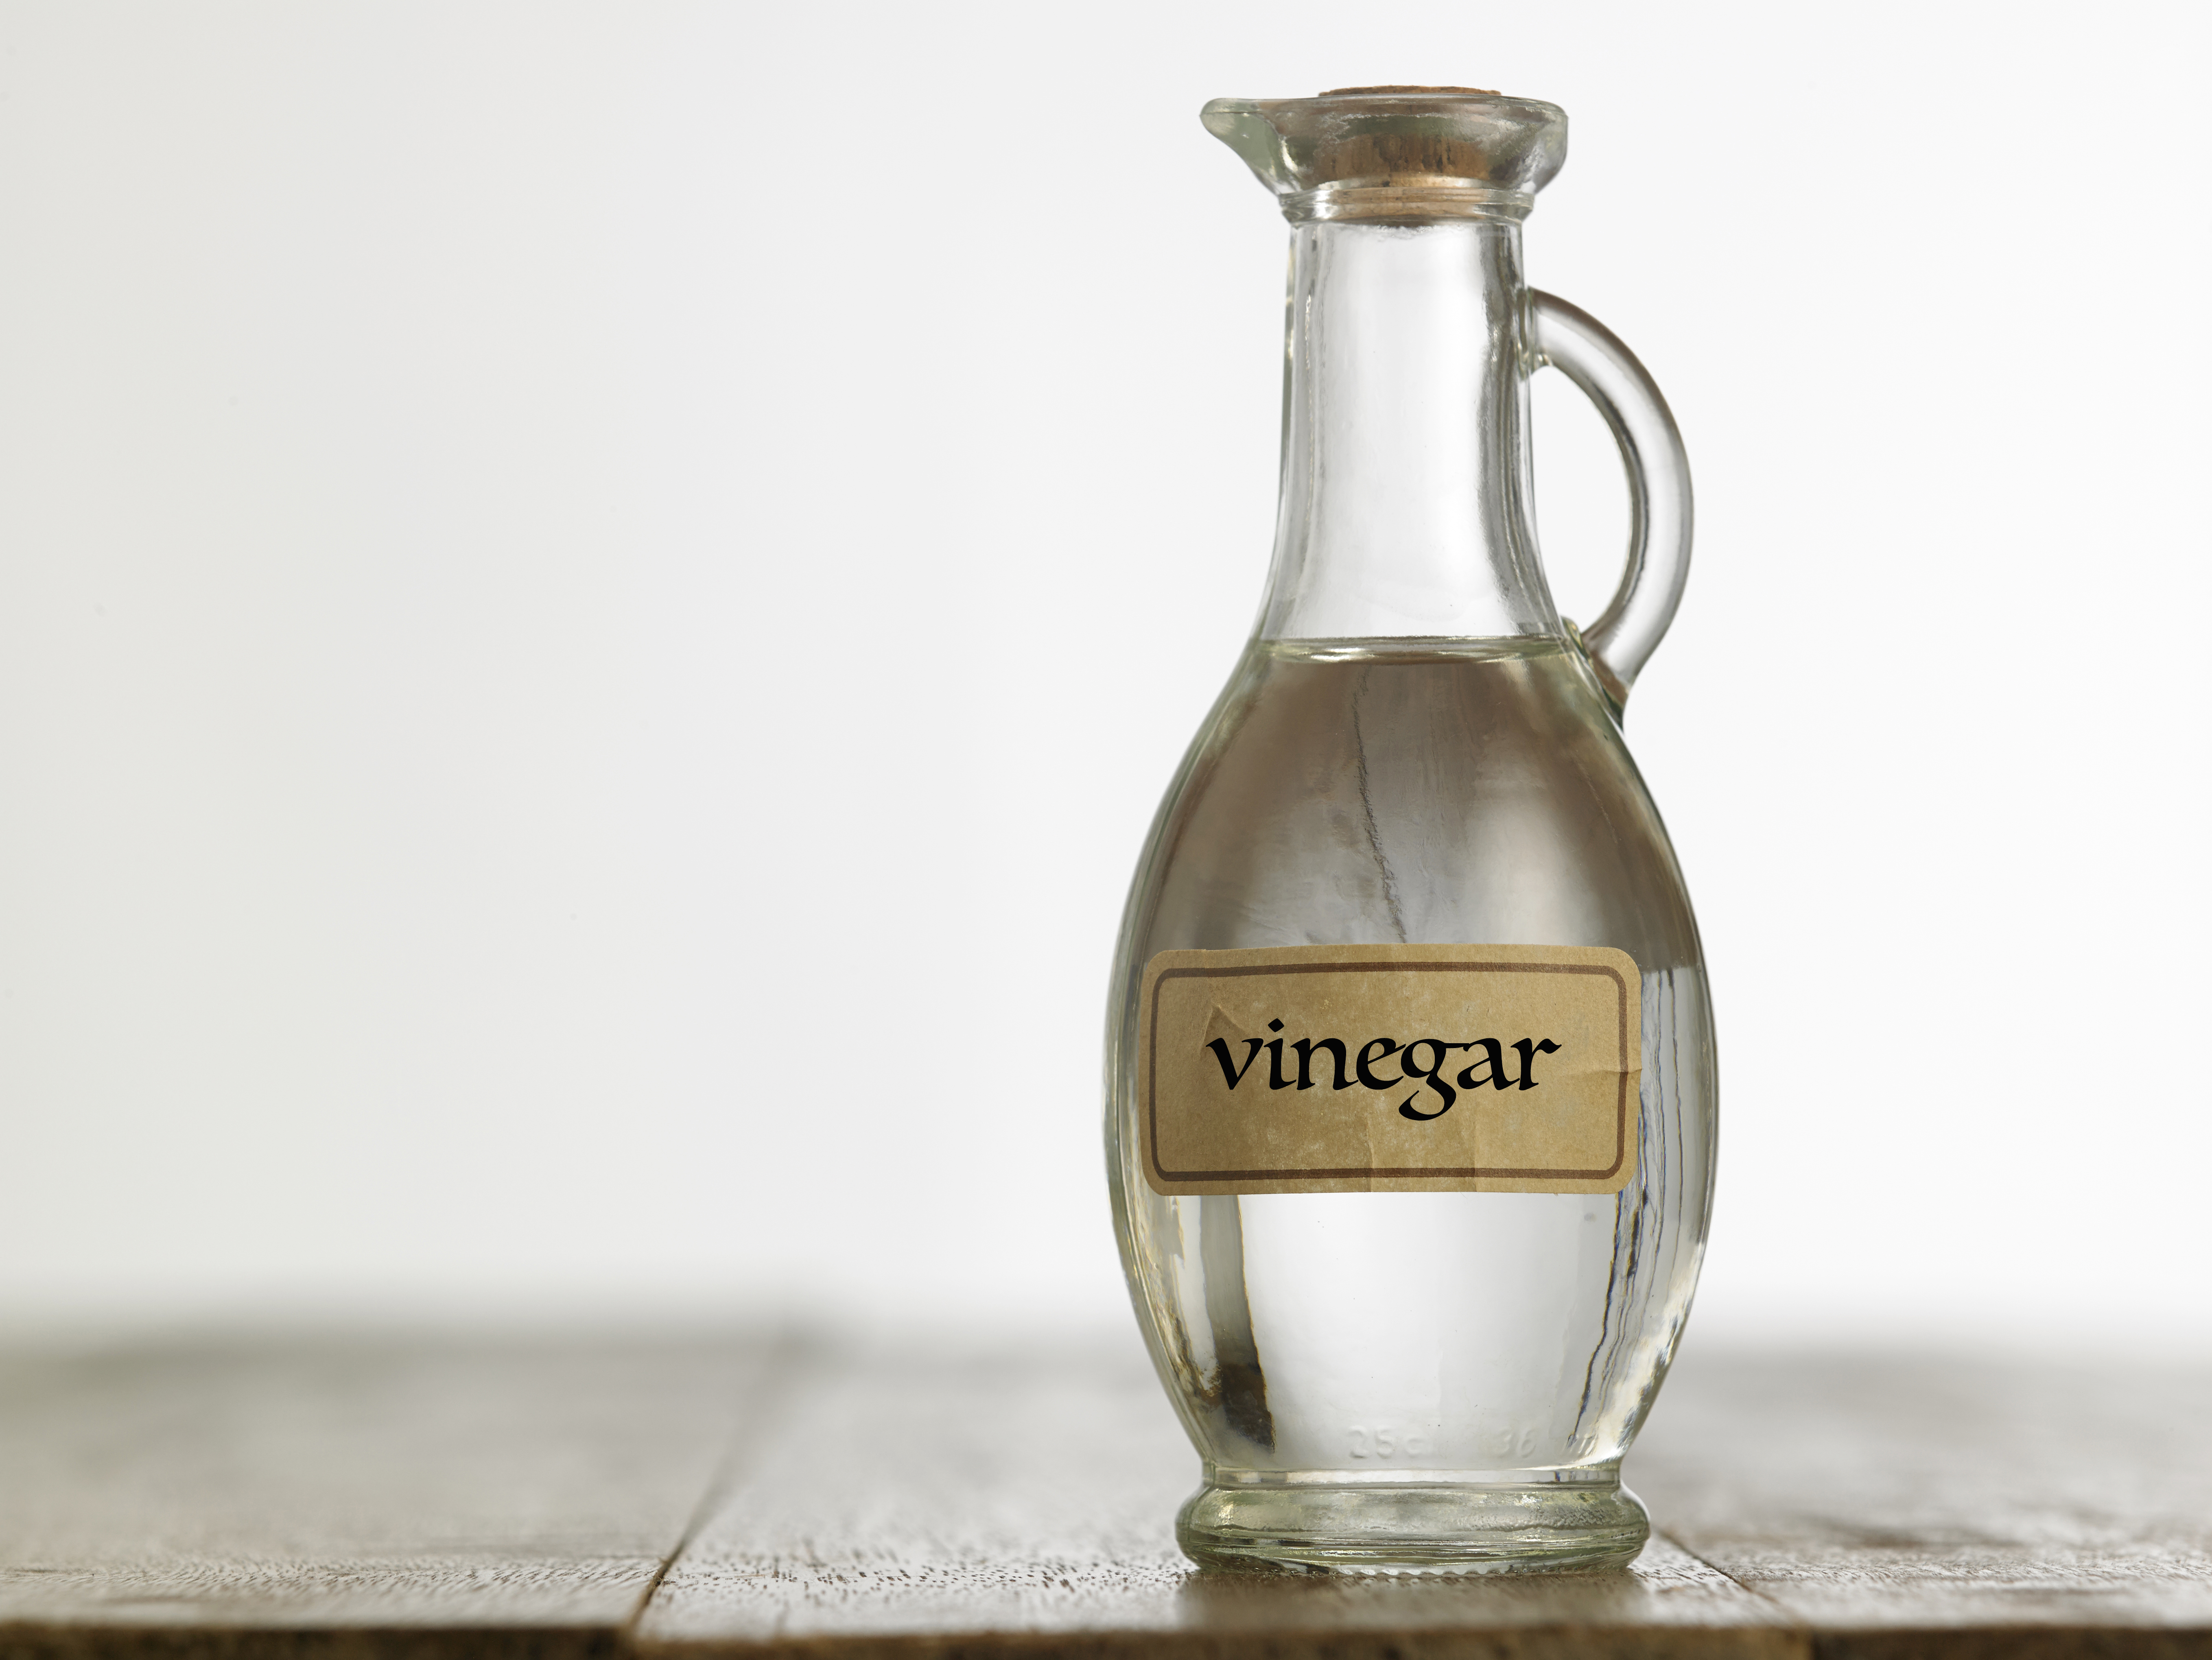 A jar of white vinegar on a wooden surface | Source: Pexels